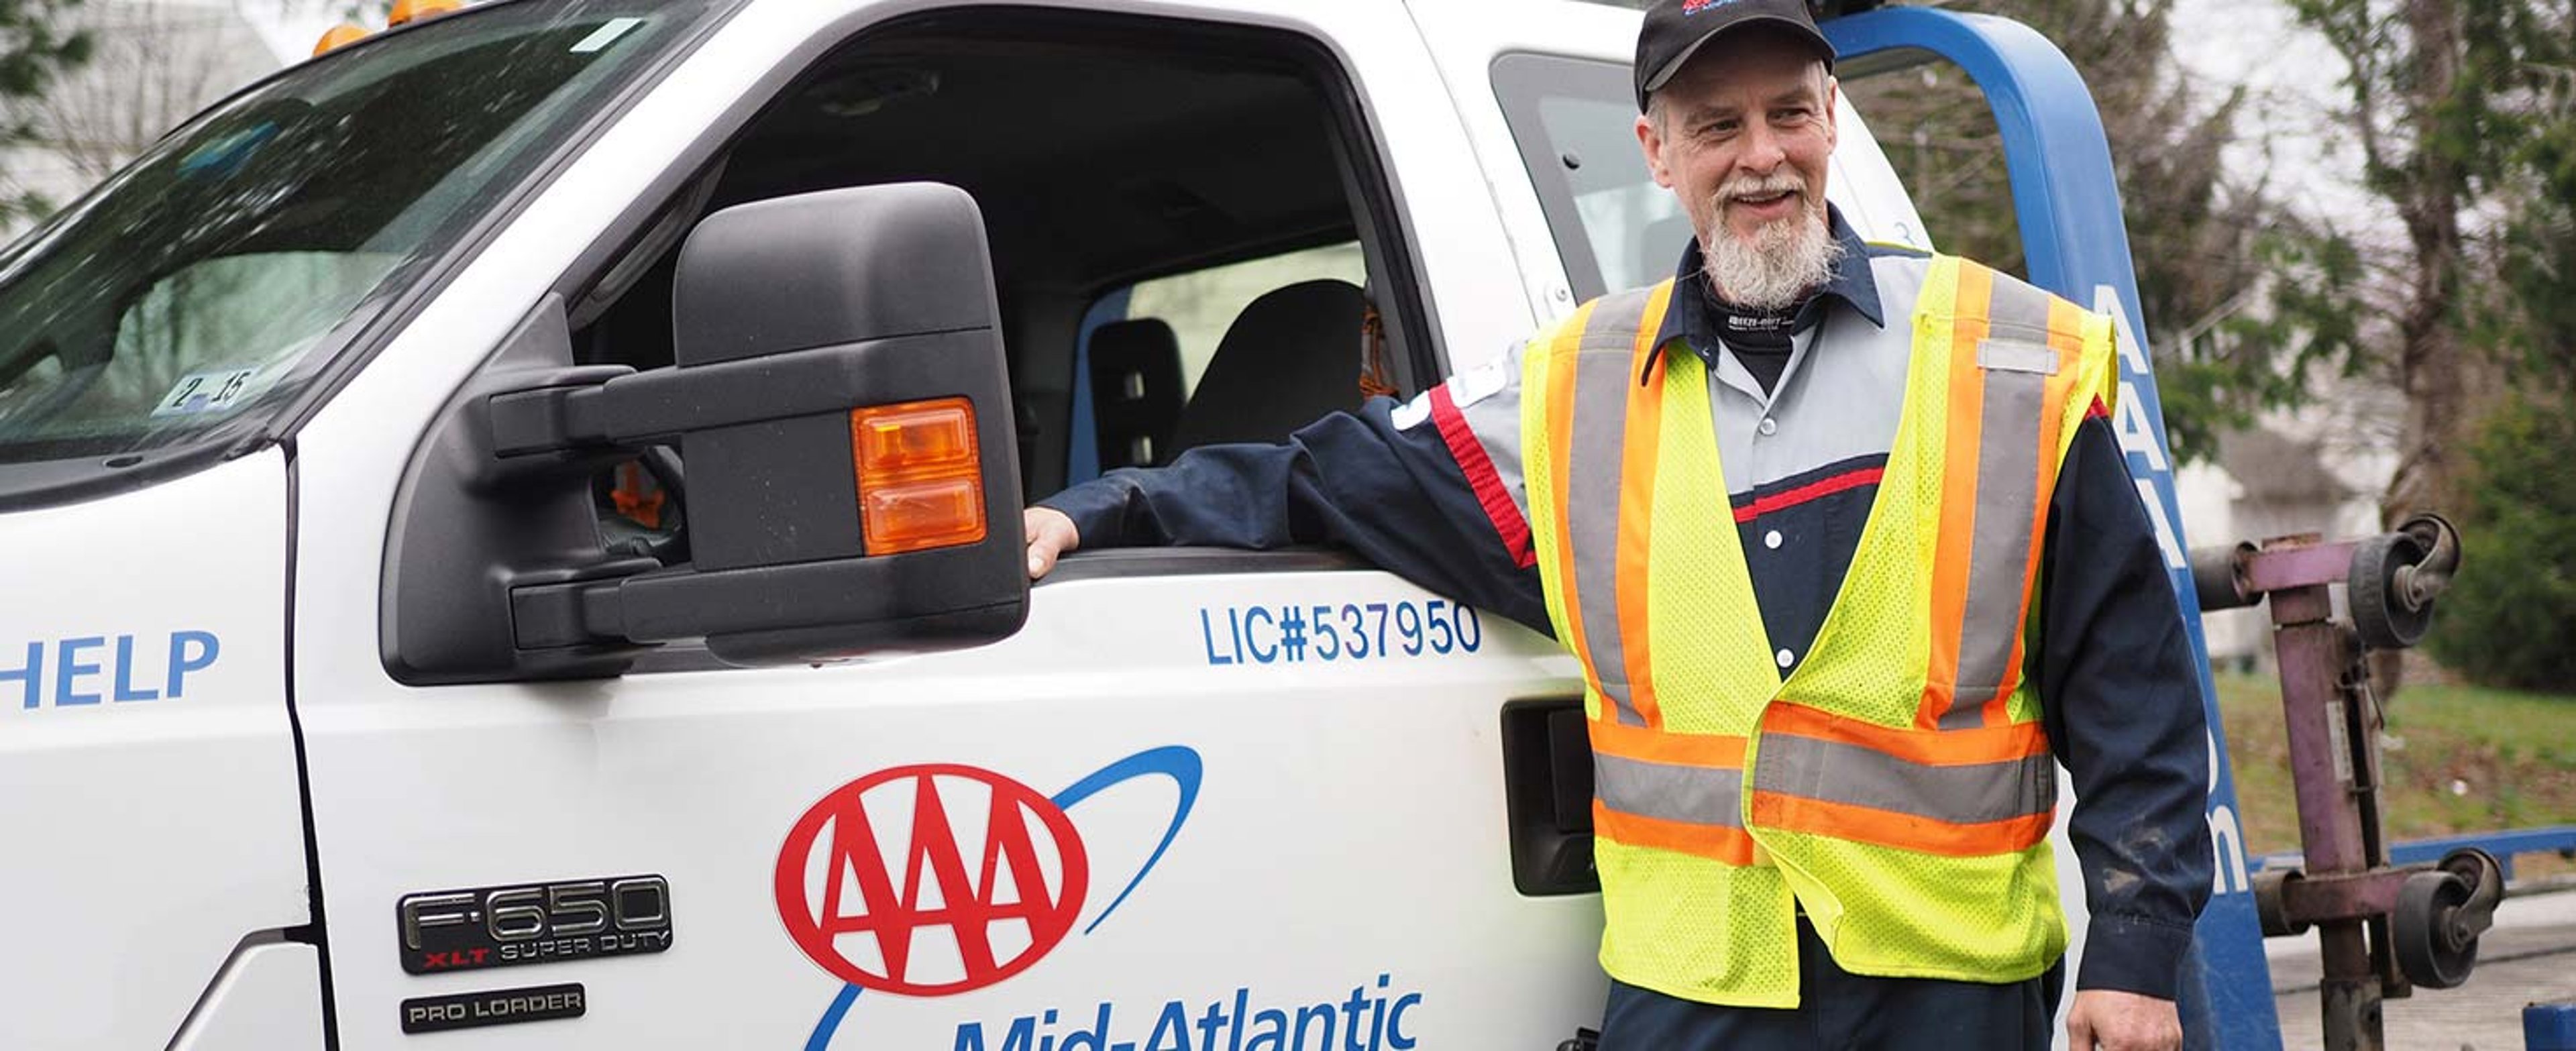 AAA tow truck driver